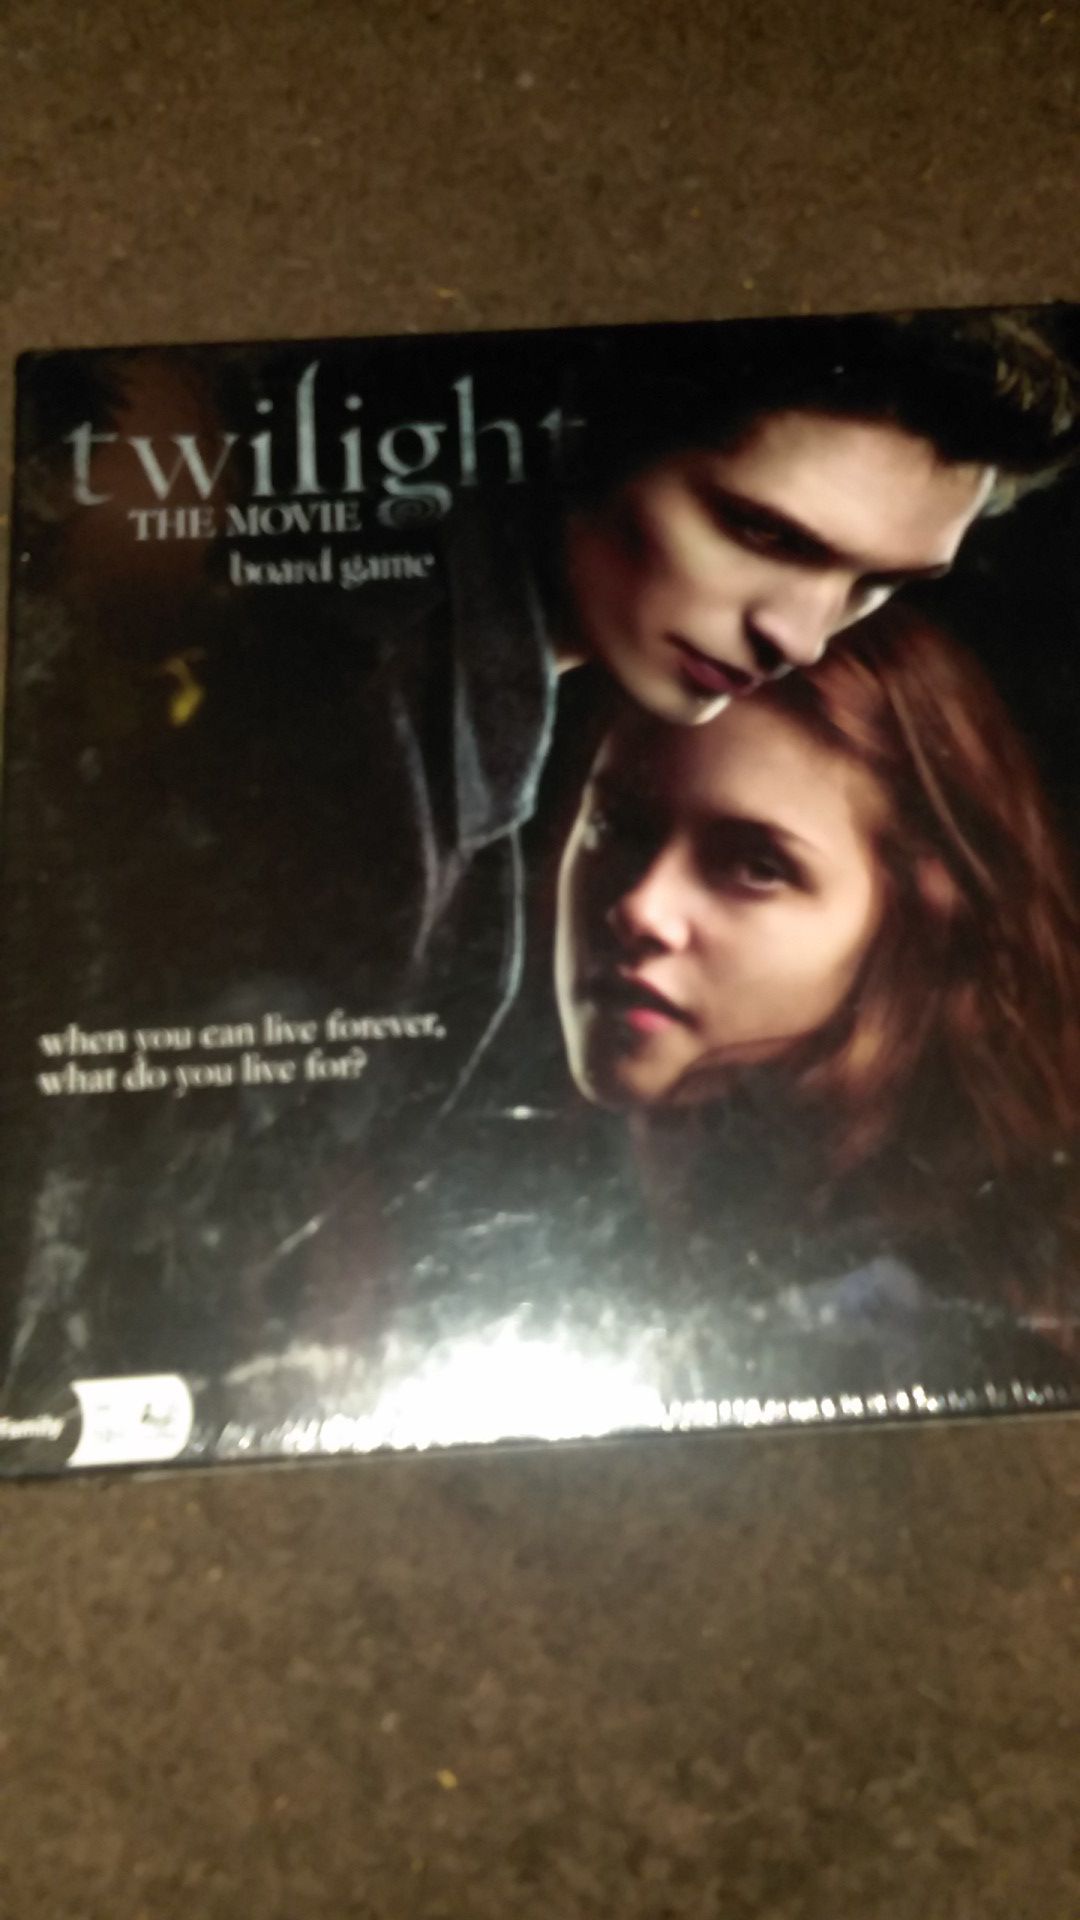 Twilight the movie board game collectible